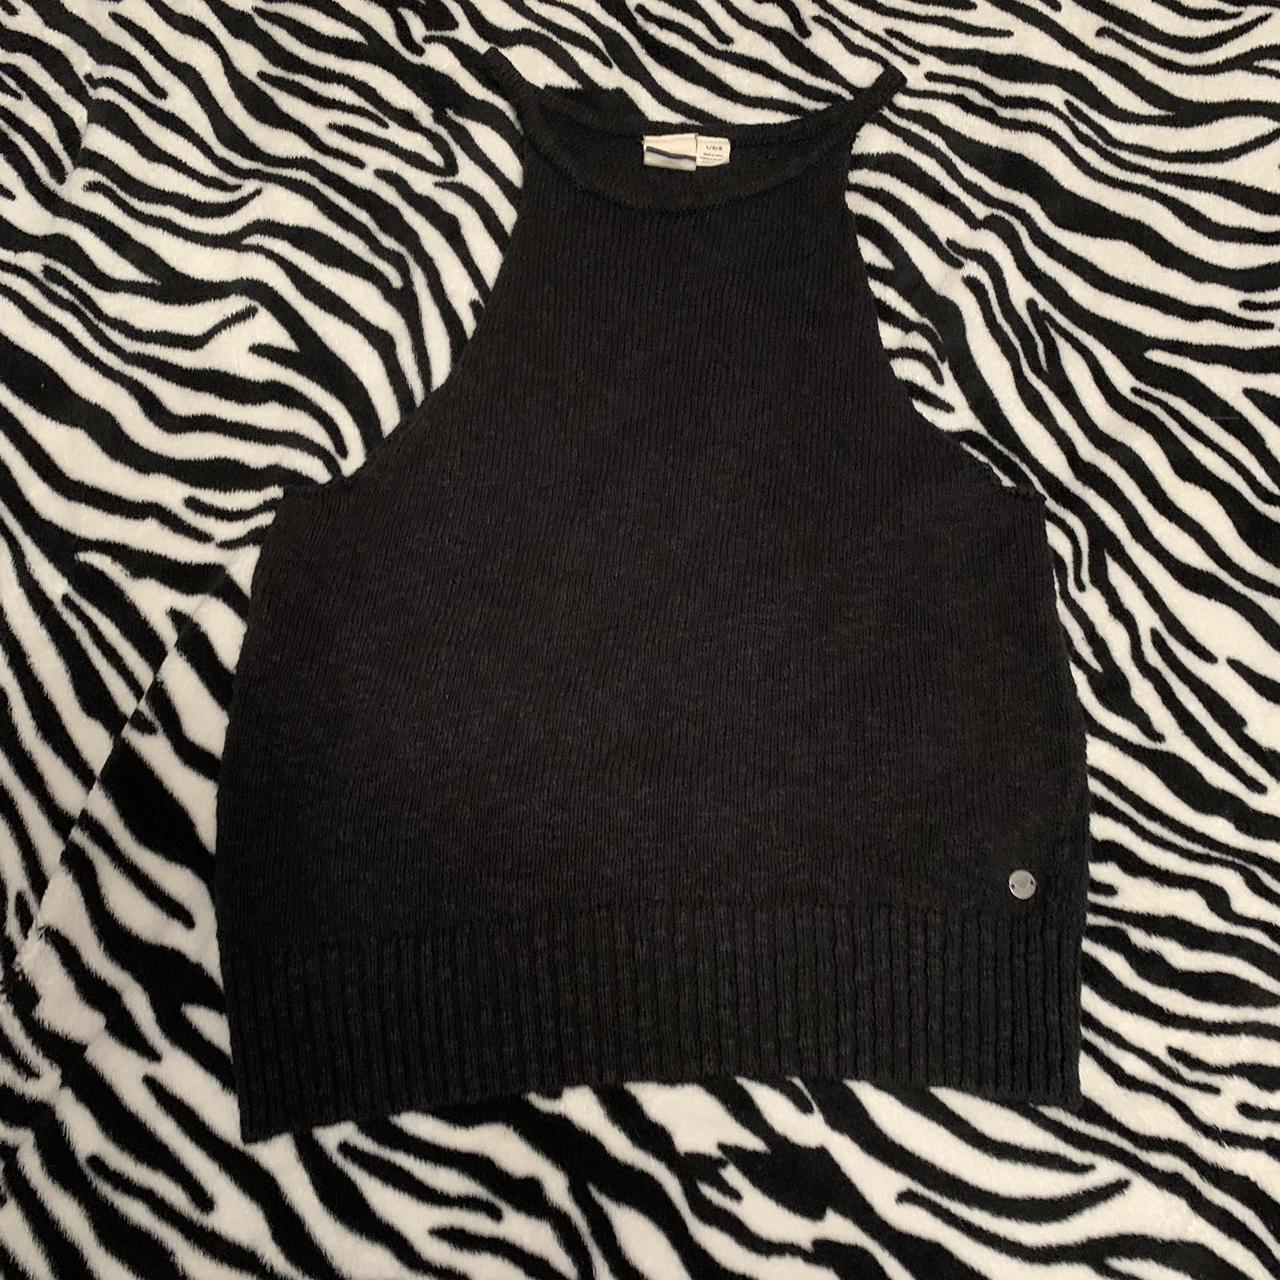 Roxy Y2K Black Tank Top Perfect For Layering This... - Depop